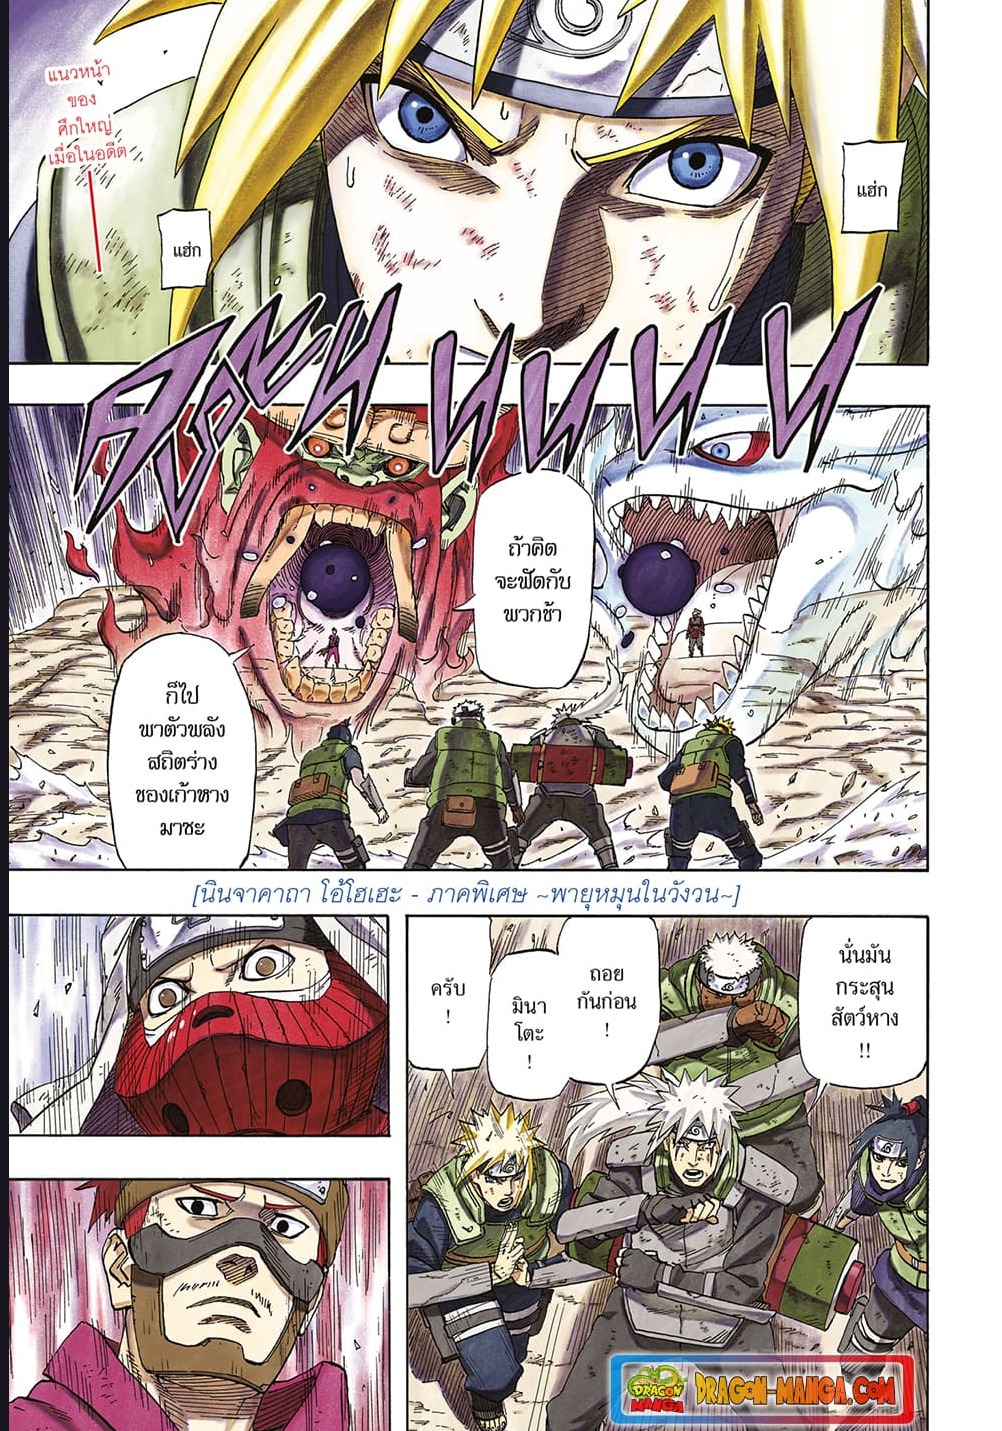 Naruto The Whorl within the Spiral ตอนที่ 1 (1)